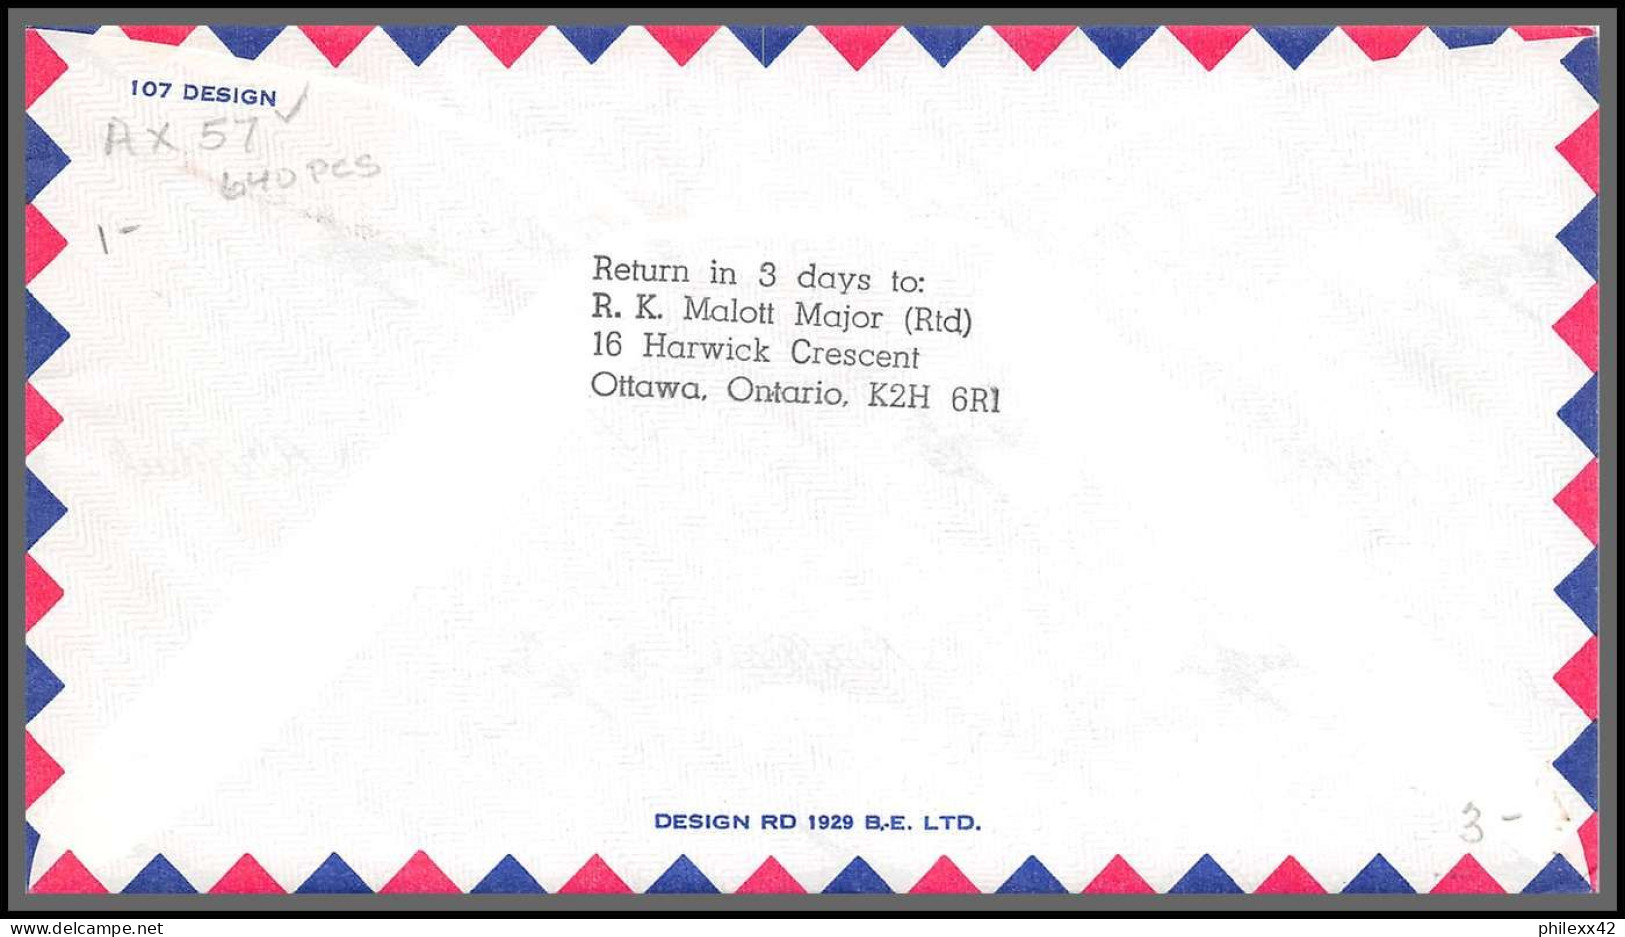 12712 Airport Mirabel Montreal 26/10/1975 Premier Vol First Flight Lettre Airmail Cover Canada - Aviones